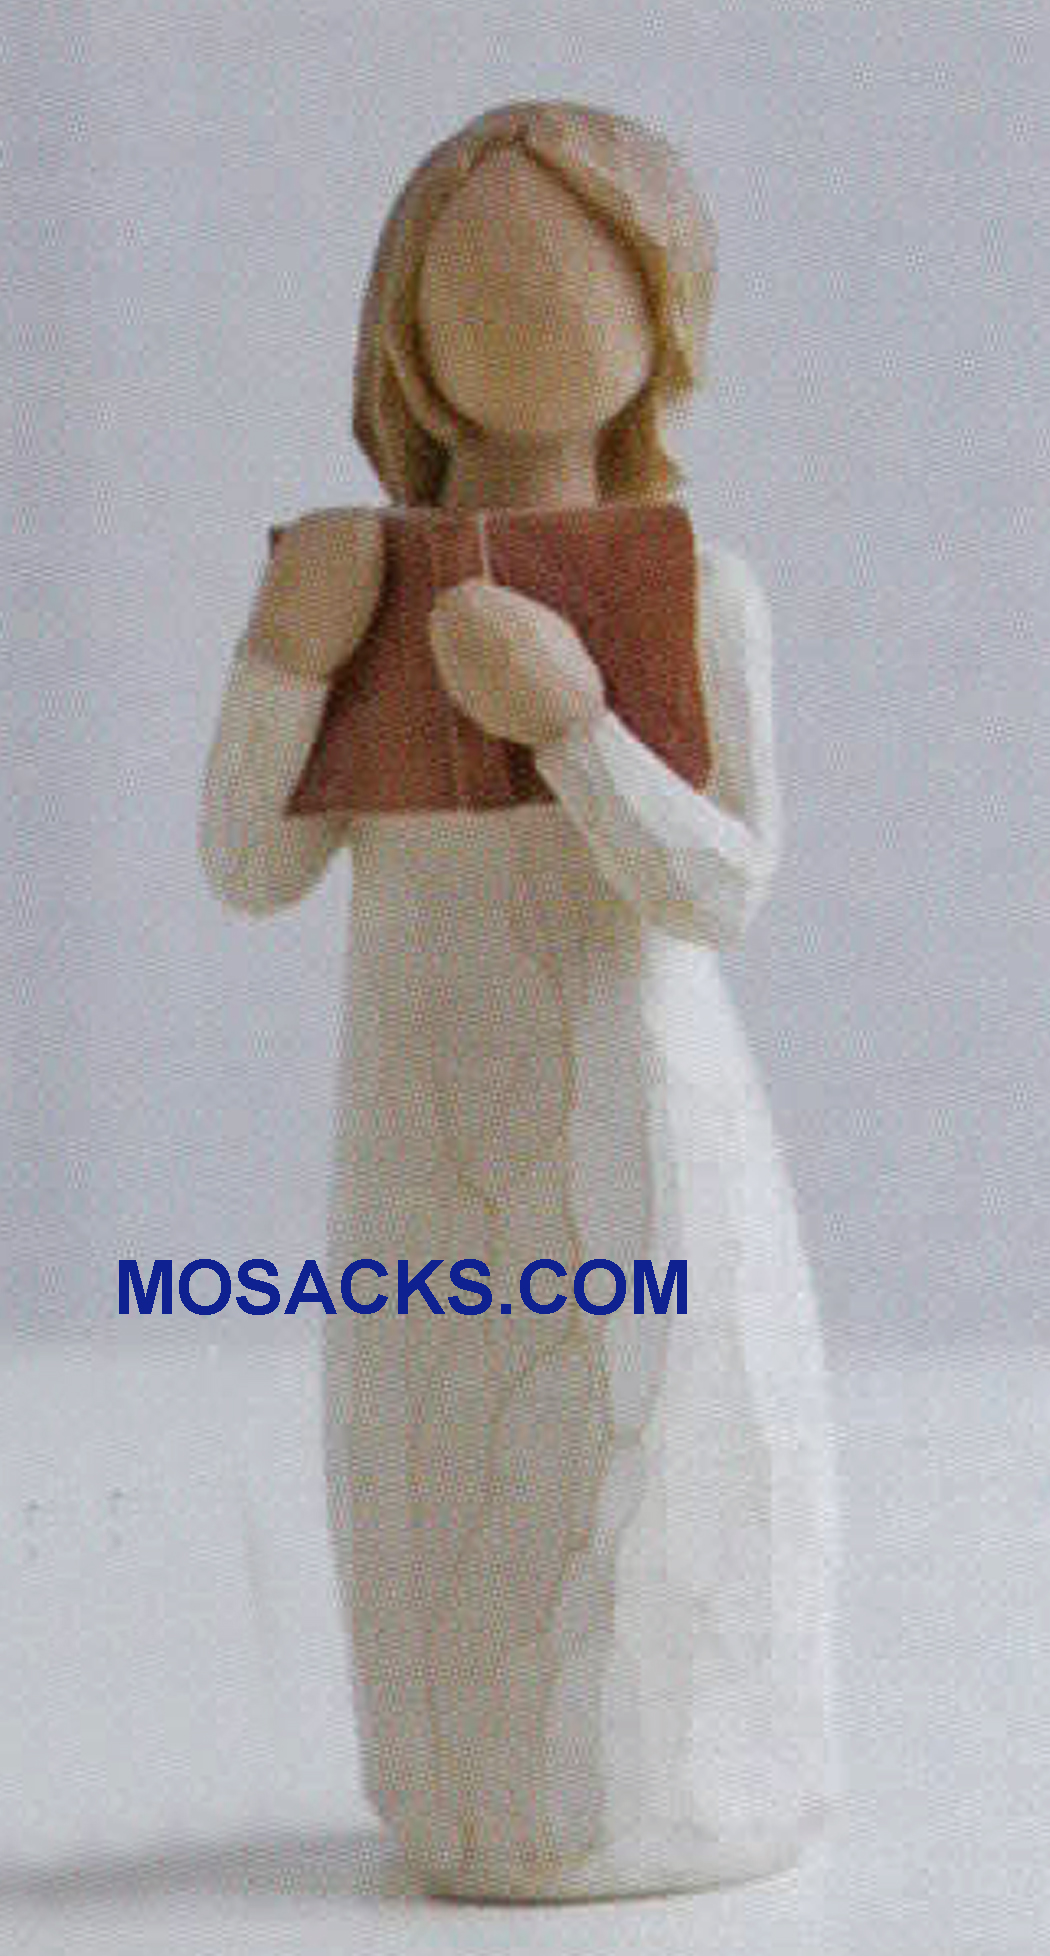 Willow Tree Figurine Love of Learning Open books Open minds 26165